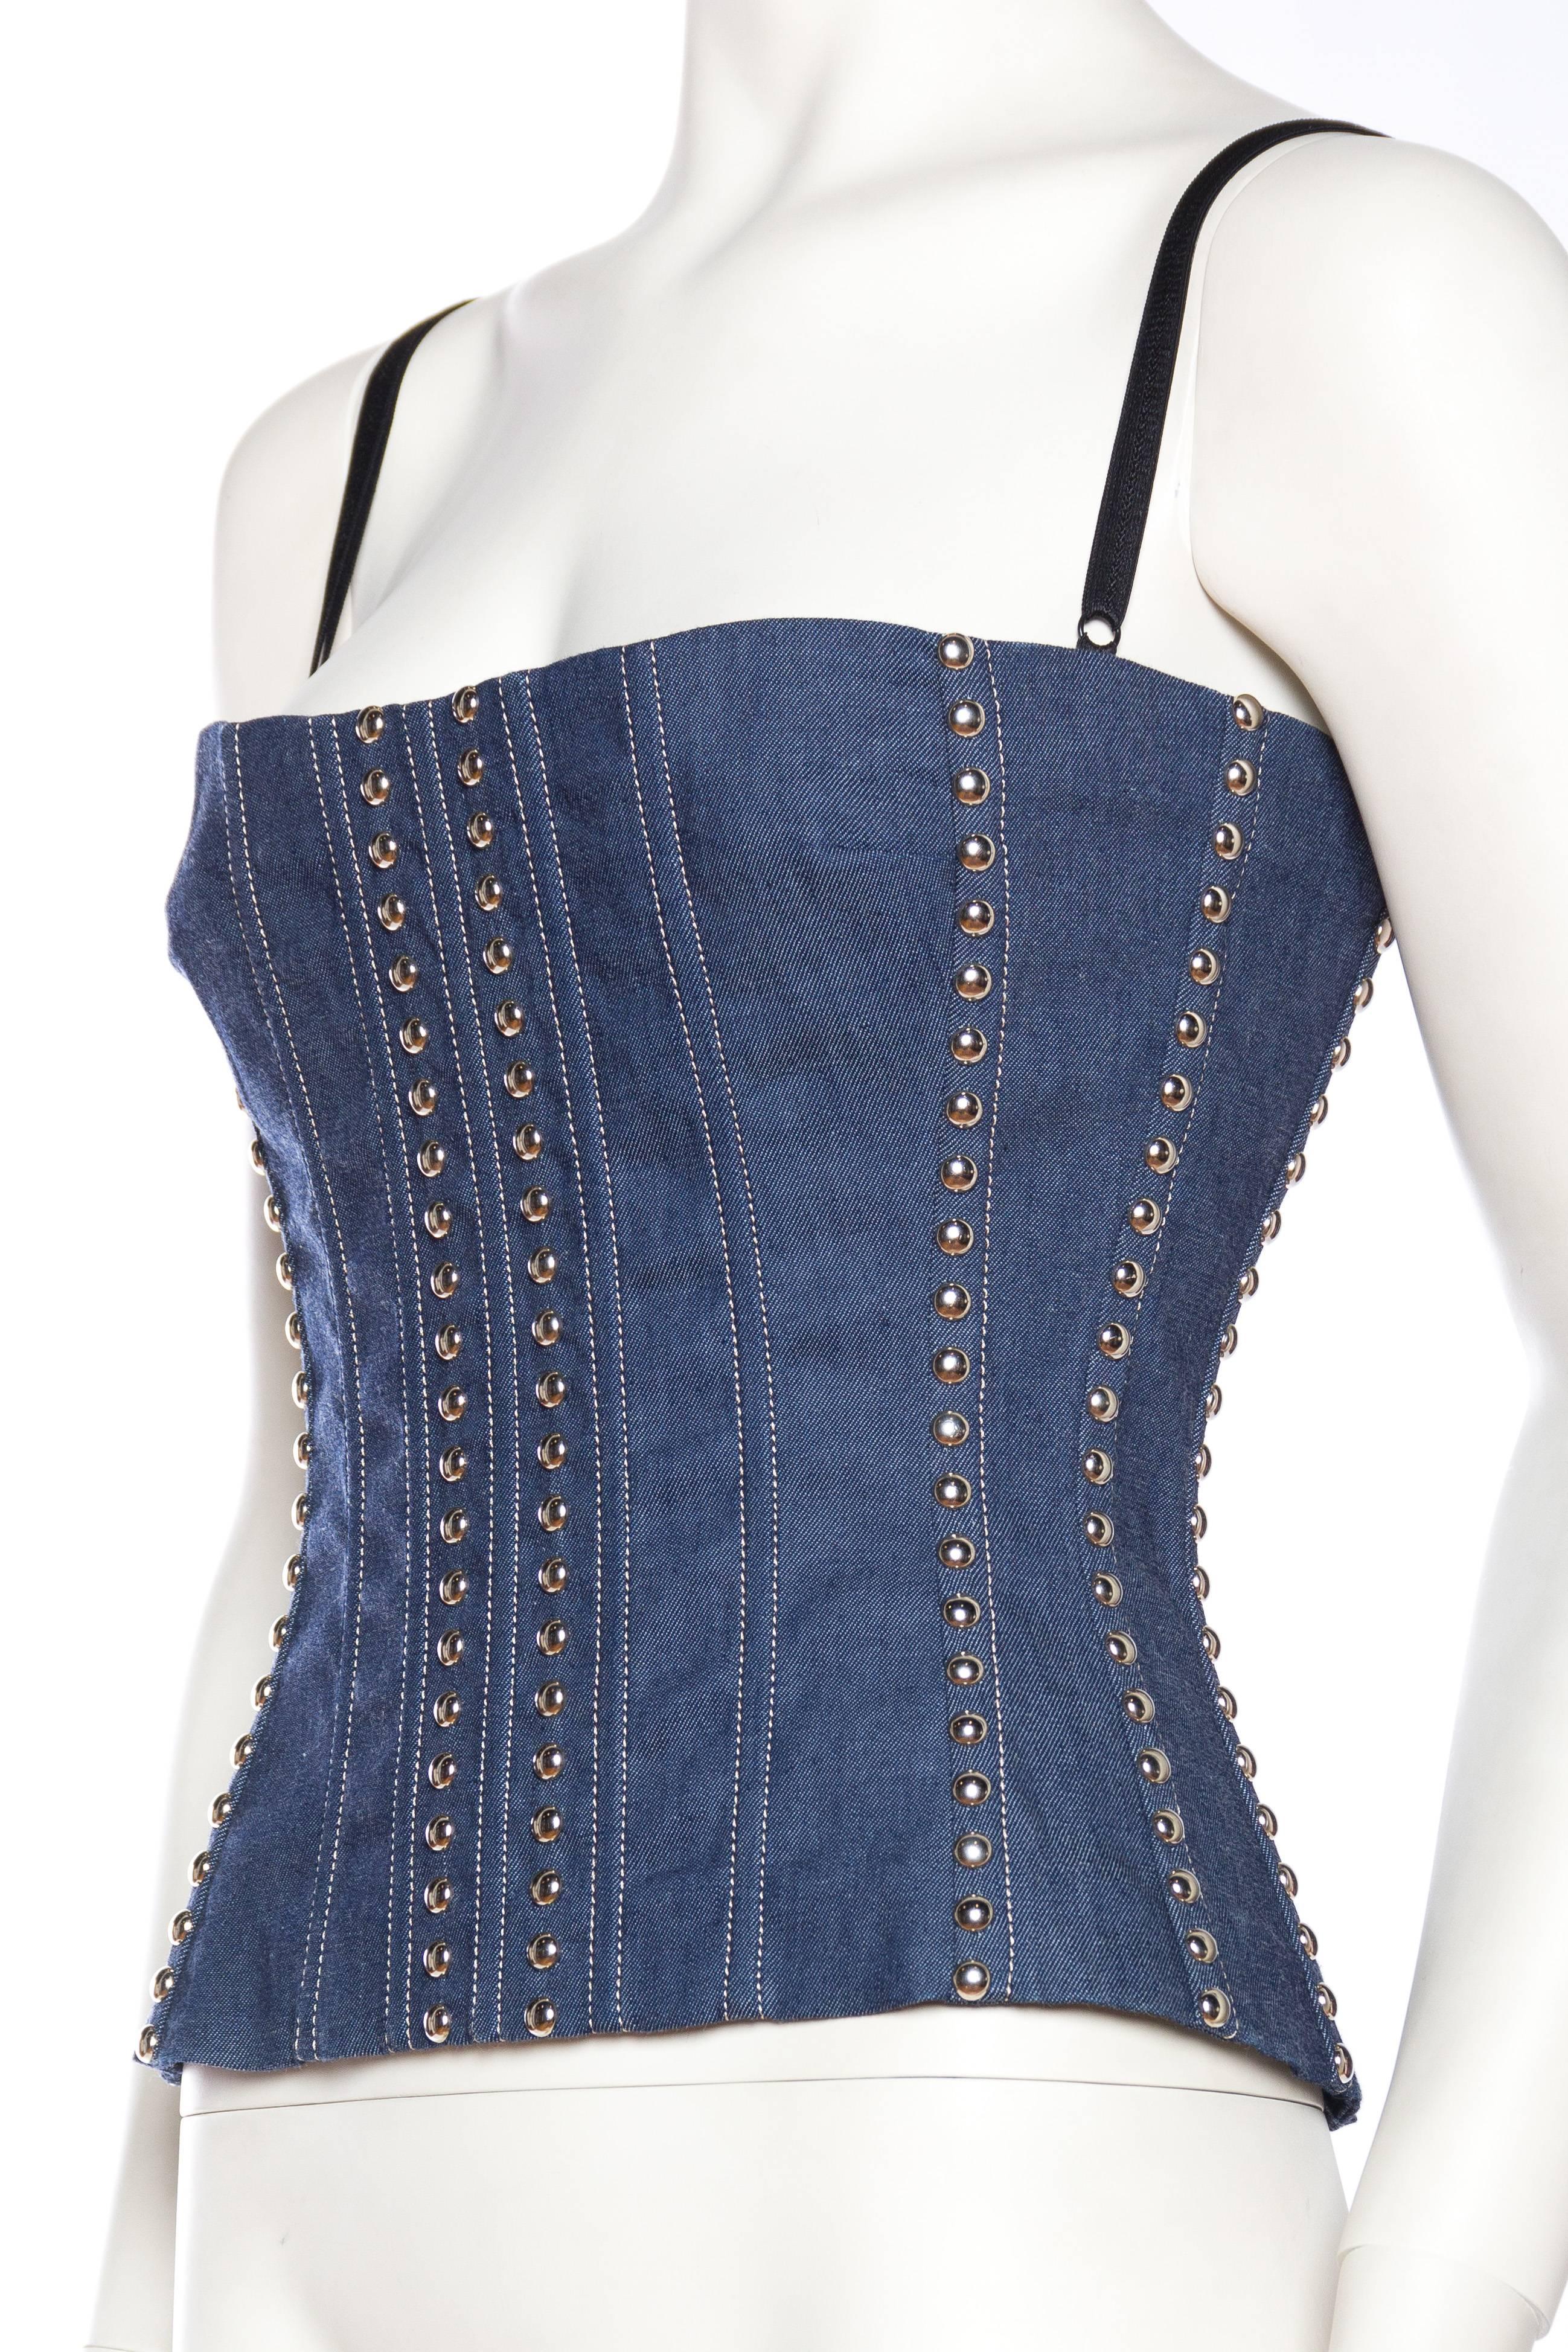 Dolce & Gabbana Studded Denim Corset In Excellent Condition In New York, NY